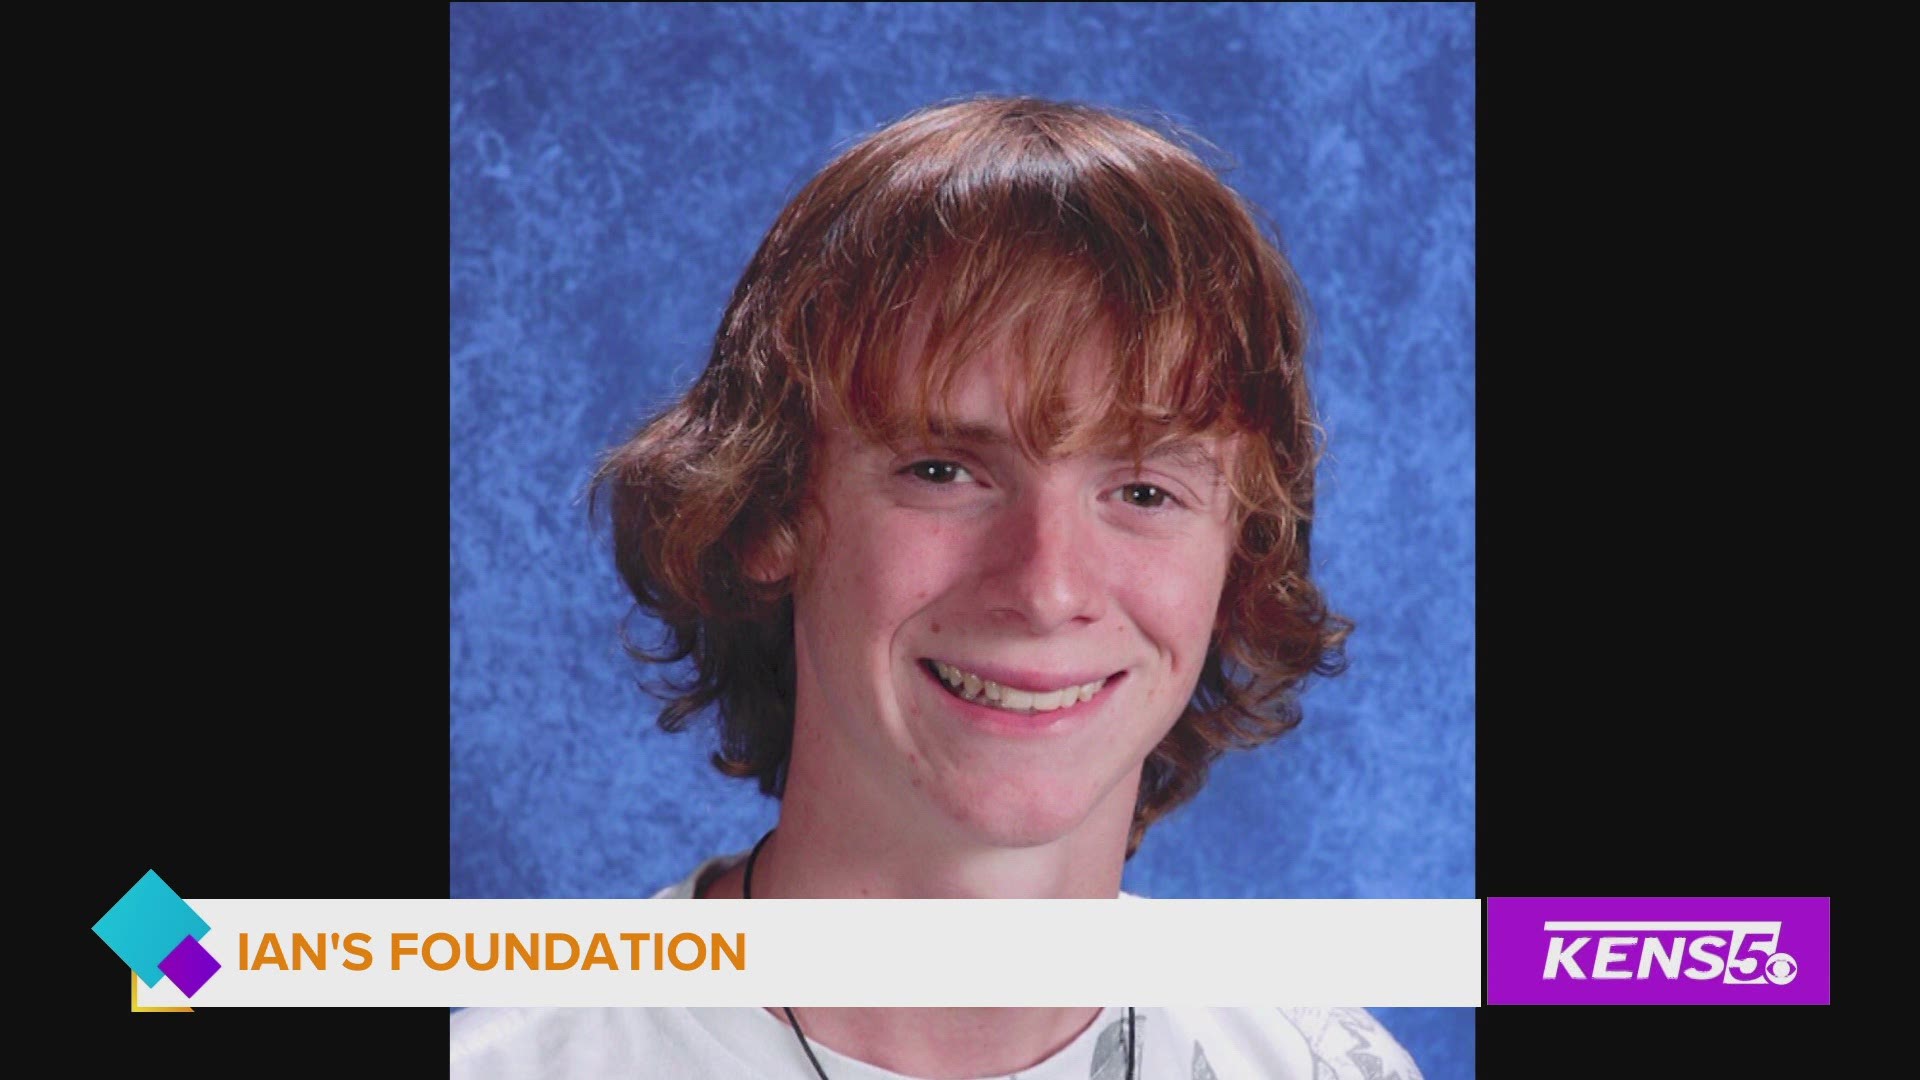 Stephanie Fincke started Ian's foundation after his untimely passing, but his legacy lives on in San Antonio.